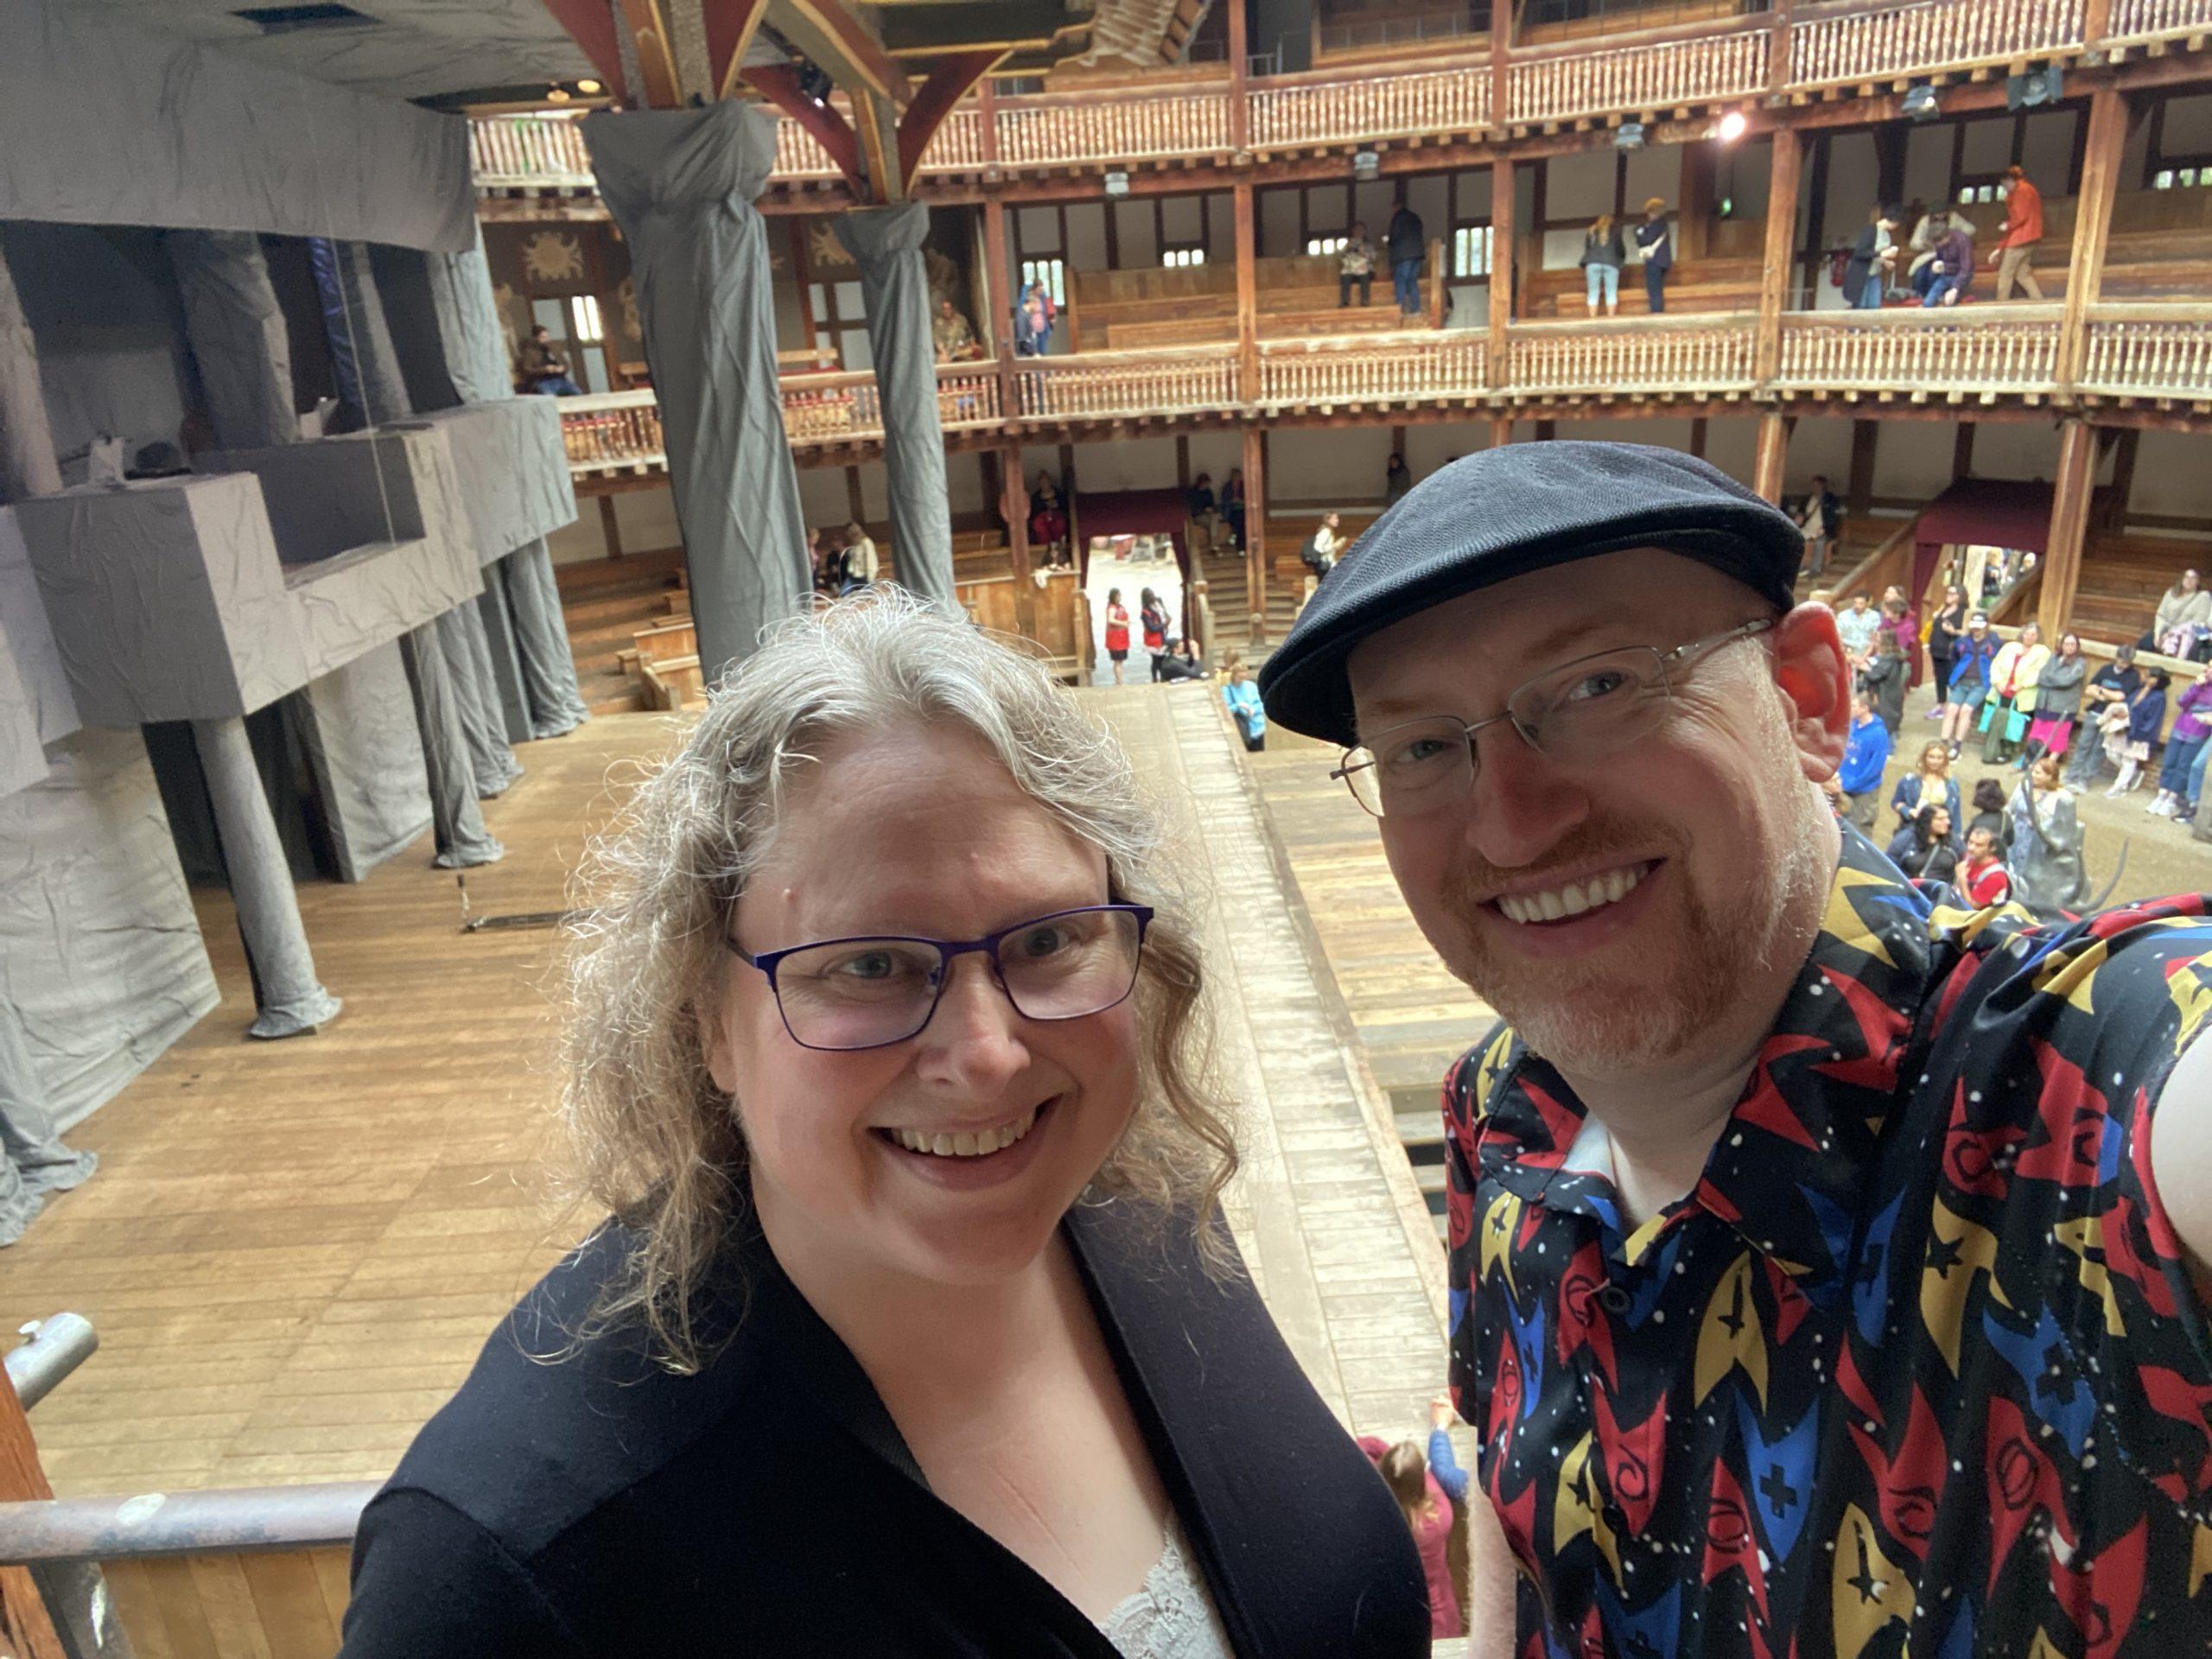 My wife and I at Shakespeare's Globe Theater in London. We're in one of the upper galleries overlooking the stage and floor area. Other audience members are finding their spots for the performance behind us.